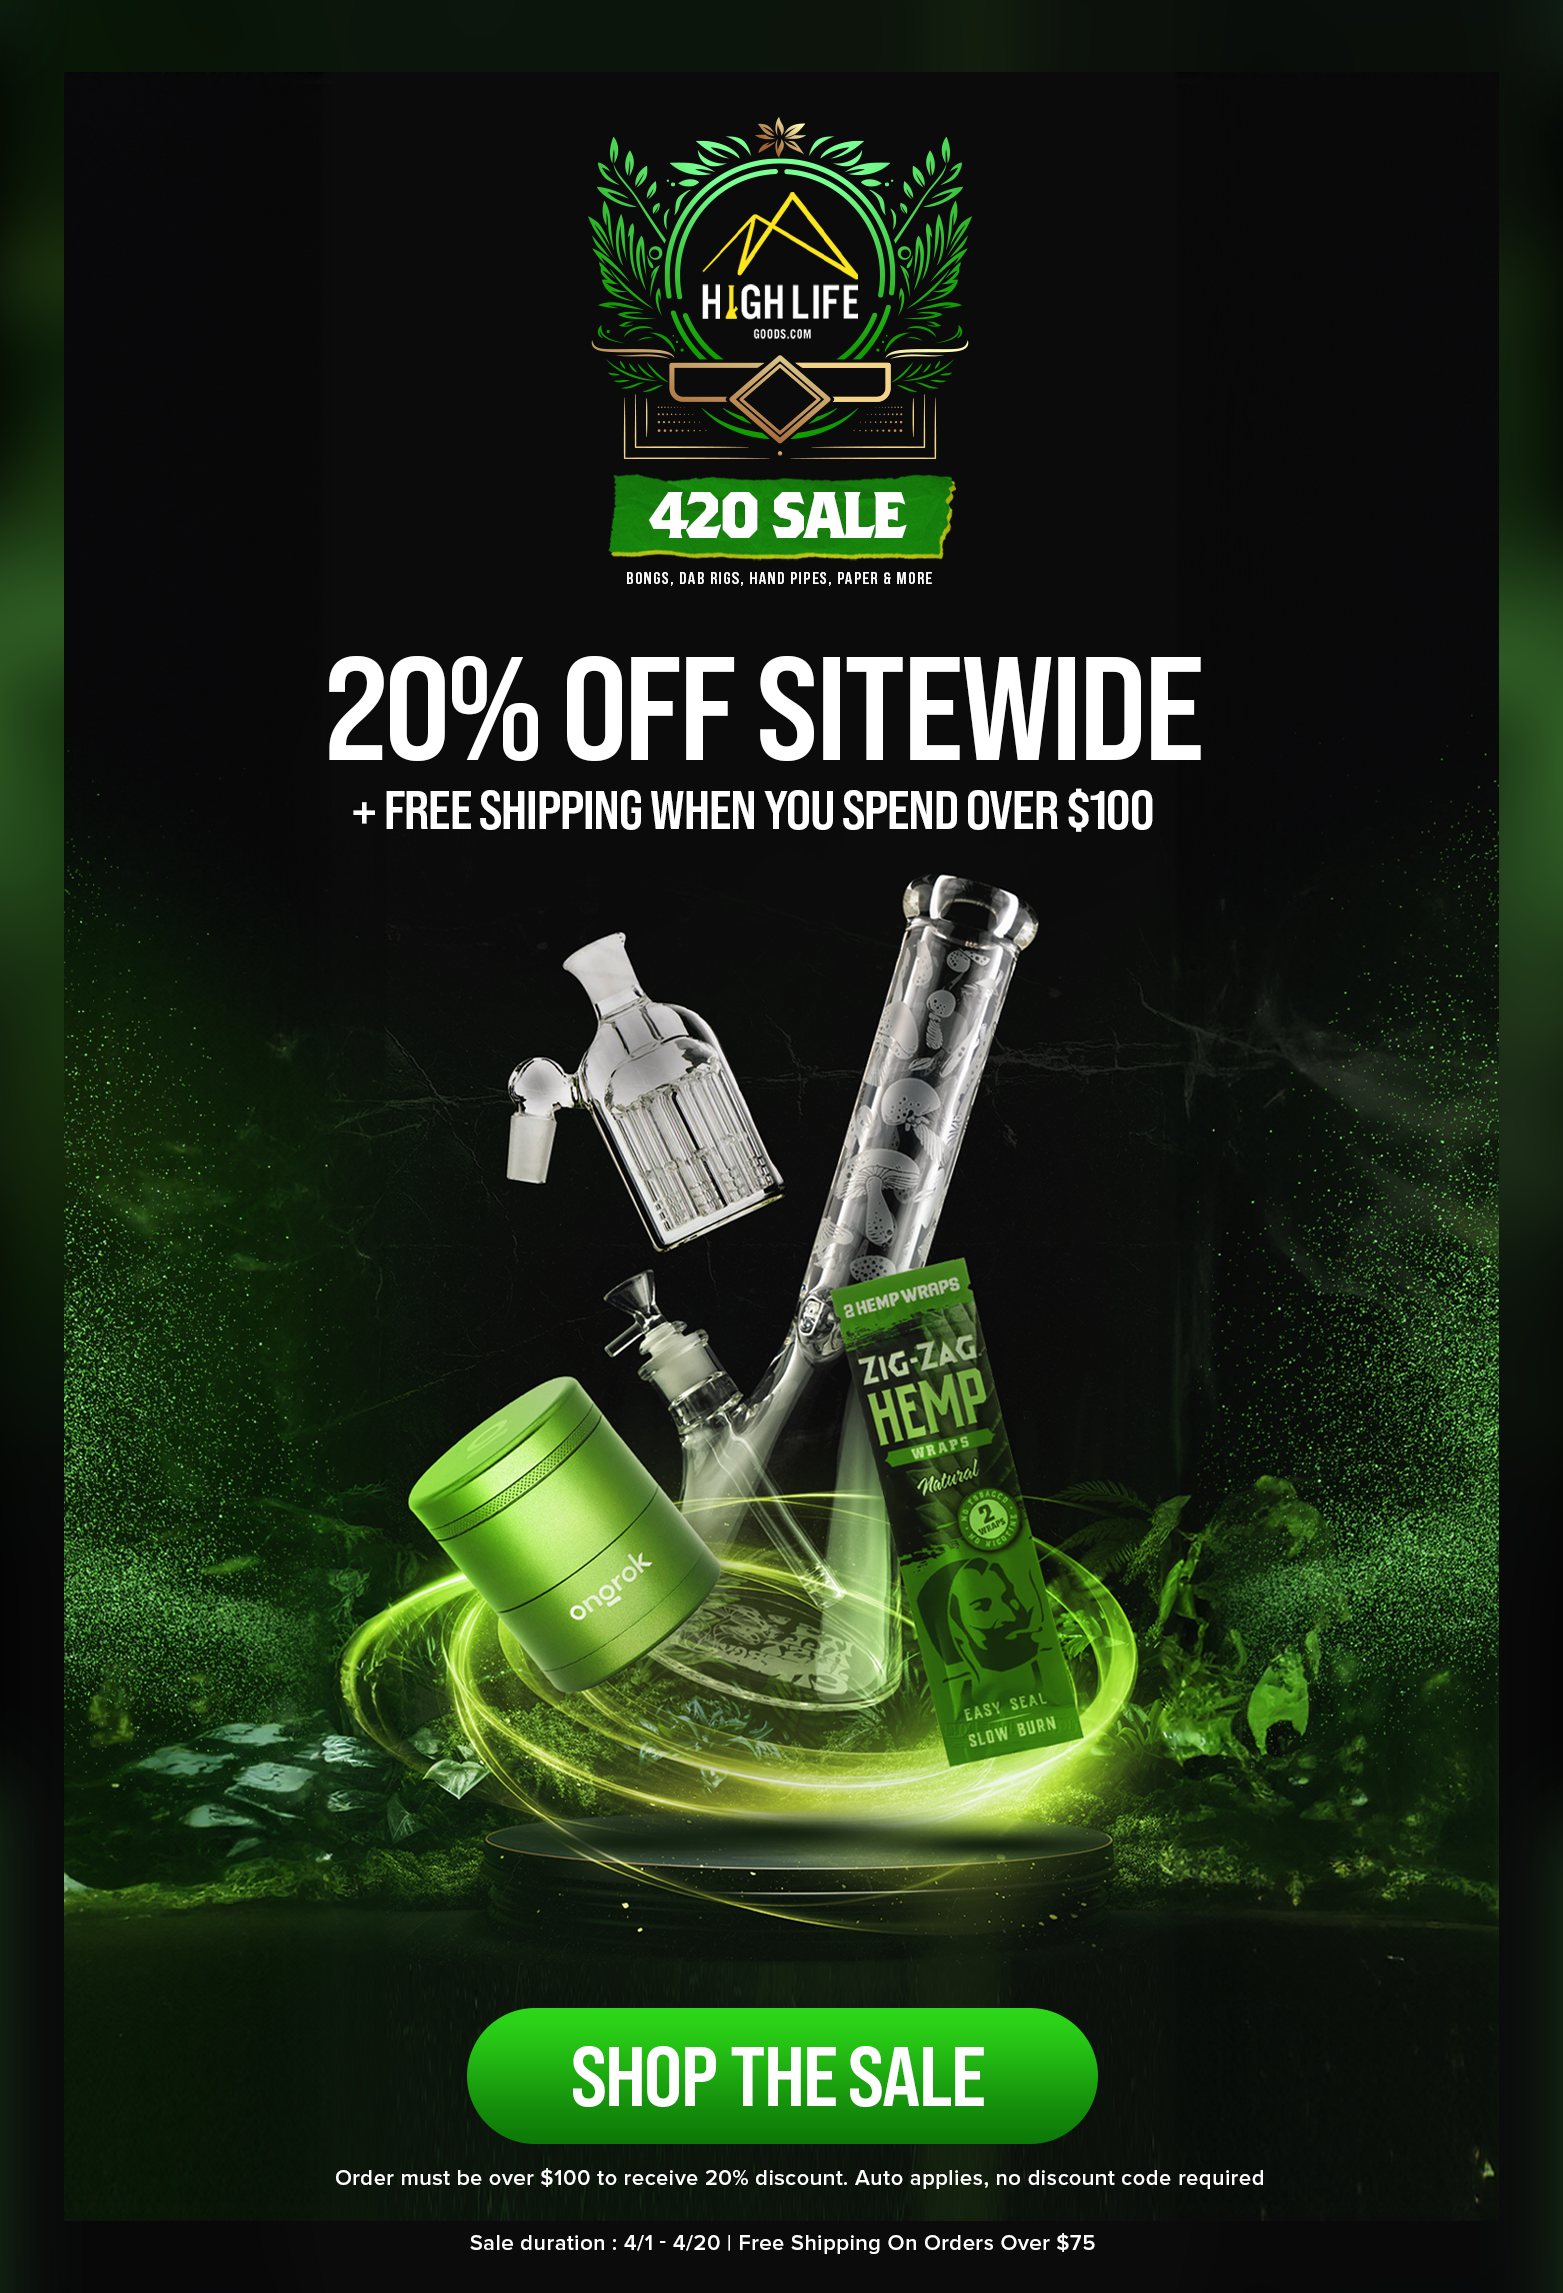 High Life Goods 420 Sale on Bongs, Dab Rigs, Hand Pipes & More!